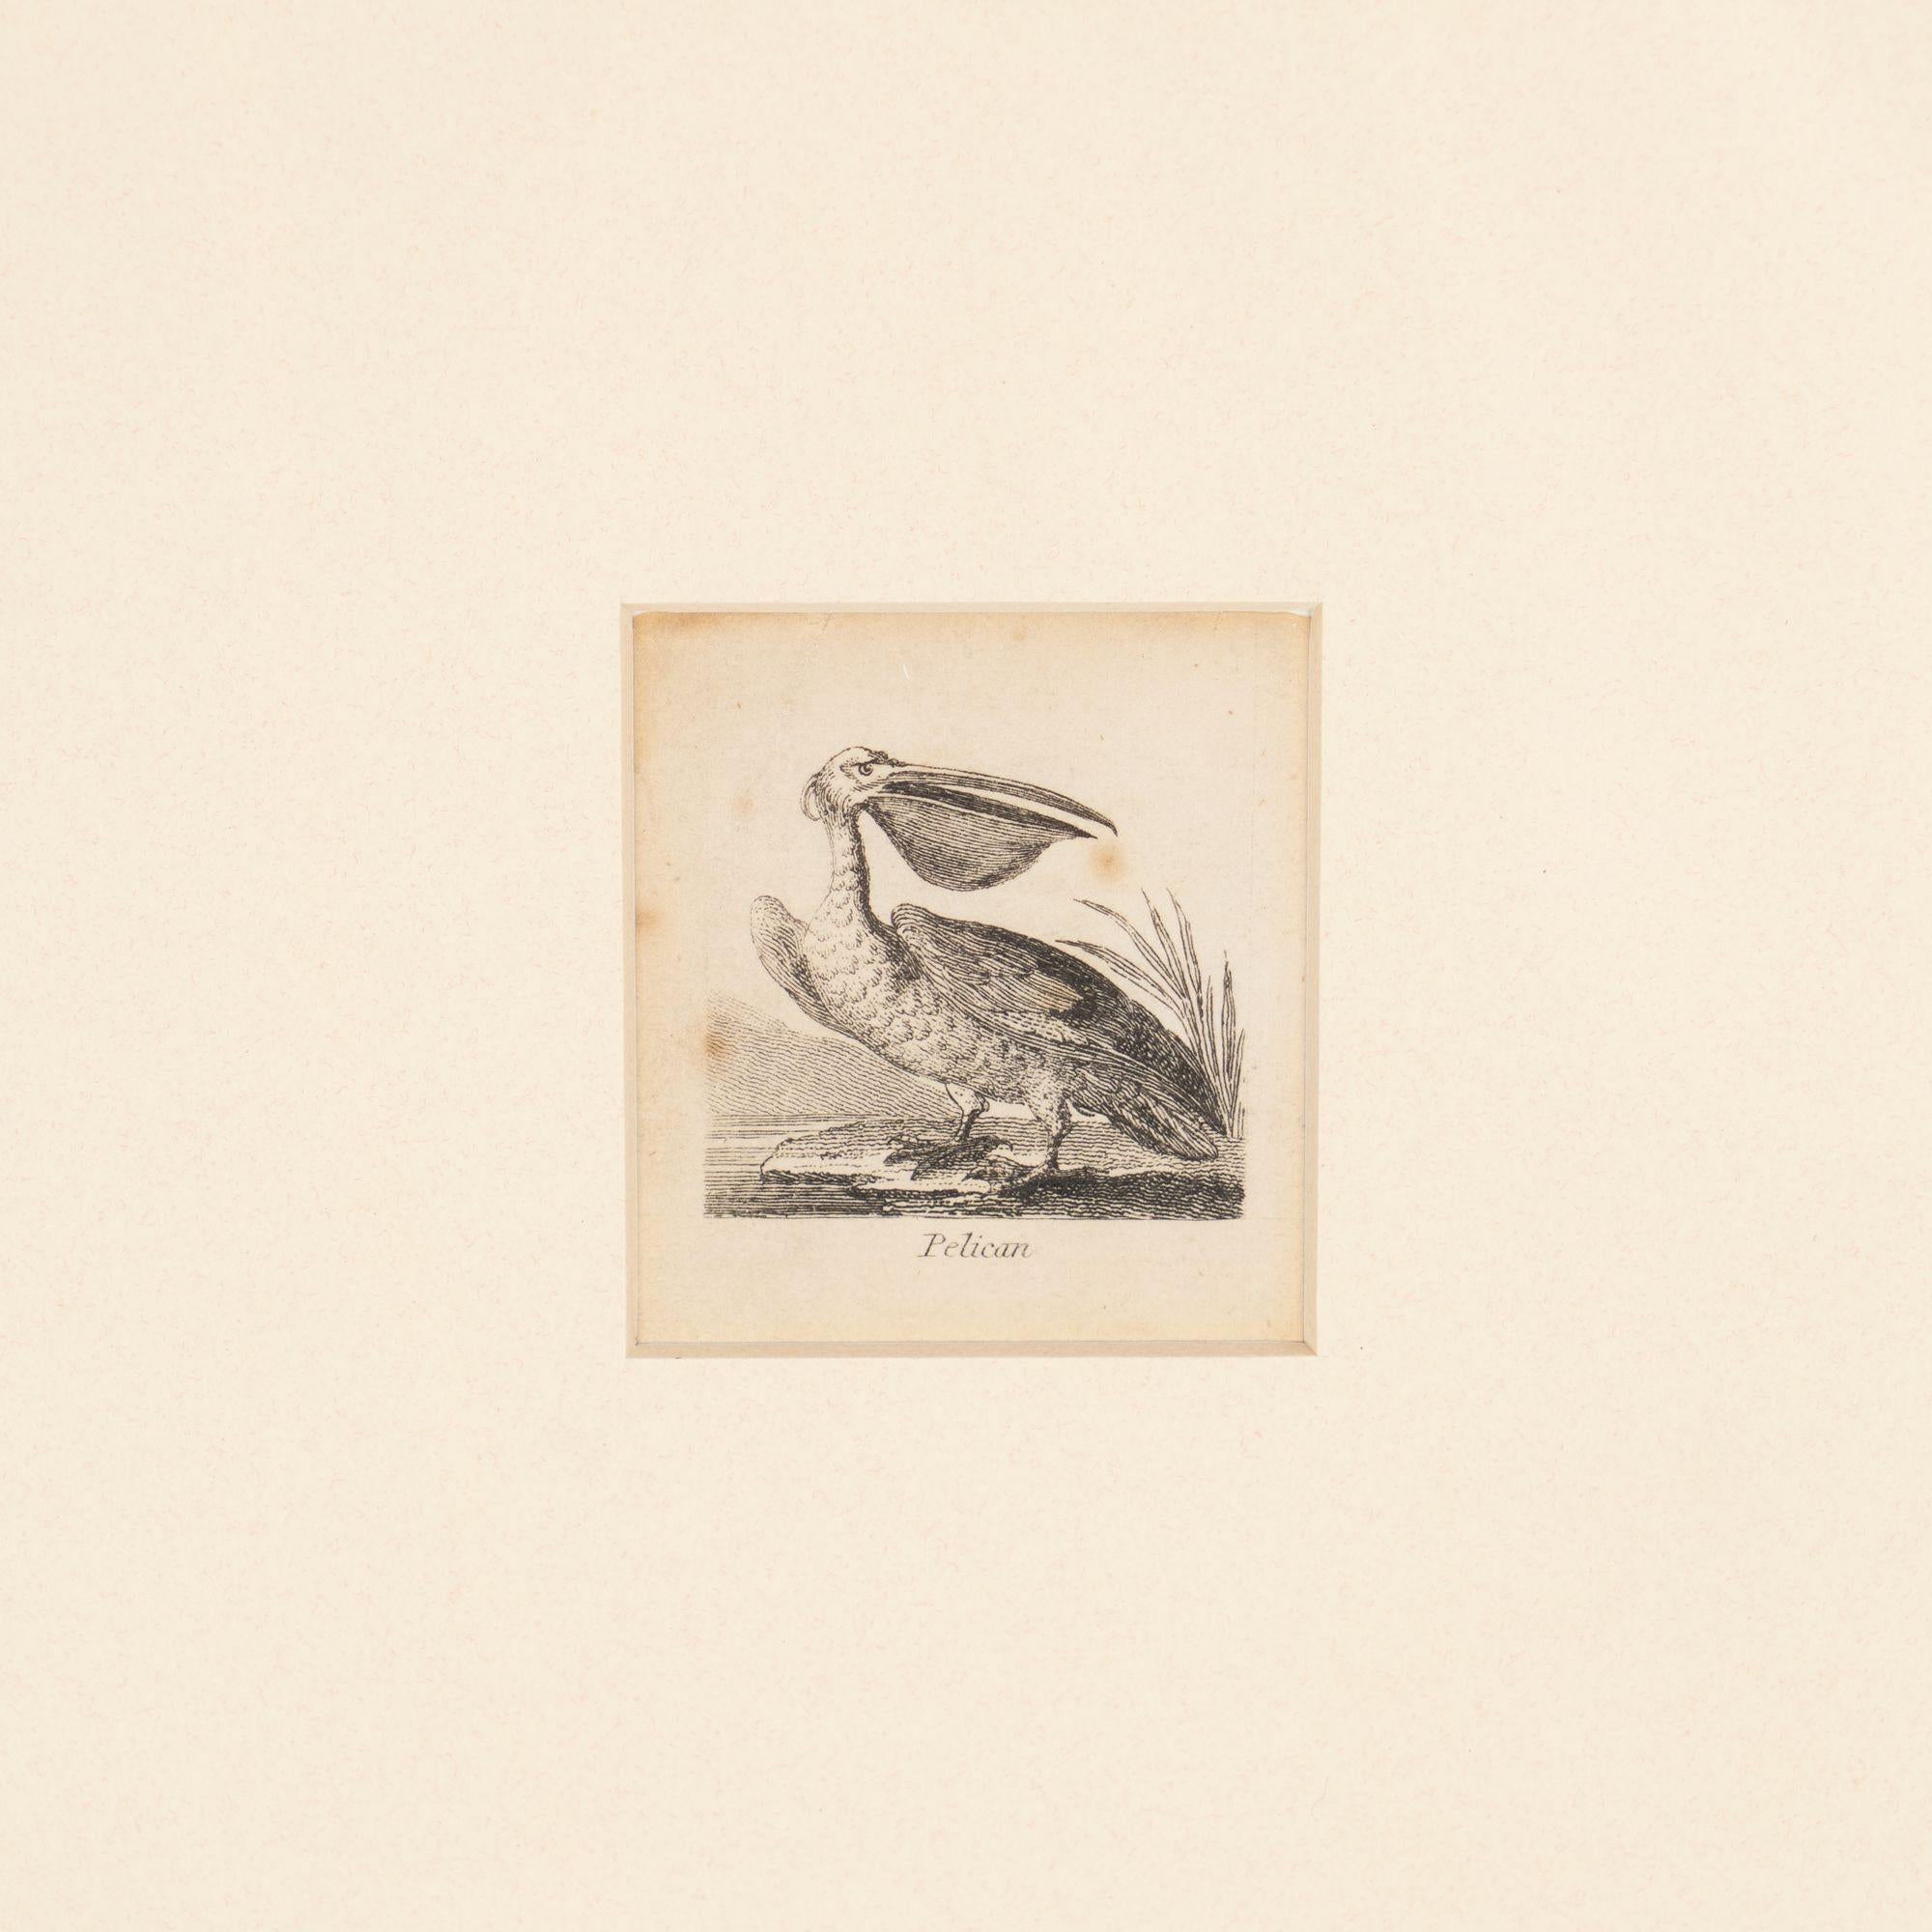 A diminutive engraving on paper of a pelican from a tiny volume titled “The Natural History of 48 Birds,” drawn by Alfred Mills. A facsimile of the title page is on the back of the frame. Mounted with acid-free archival mat and framed.

London,